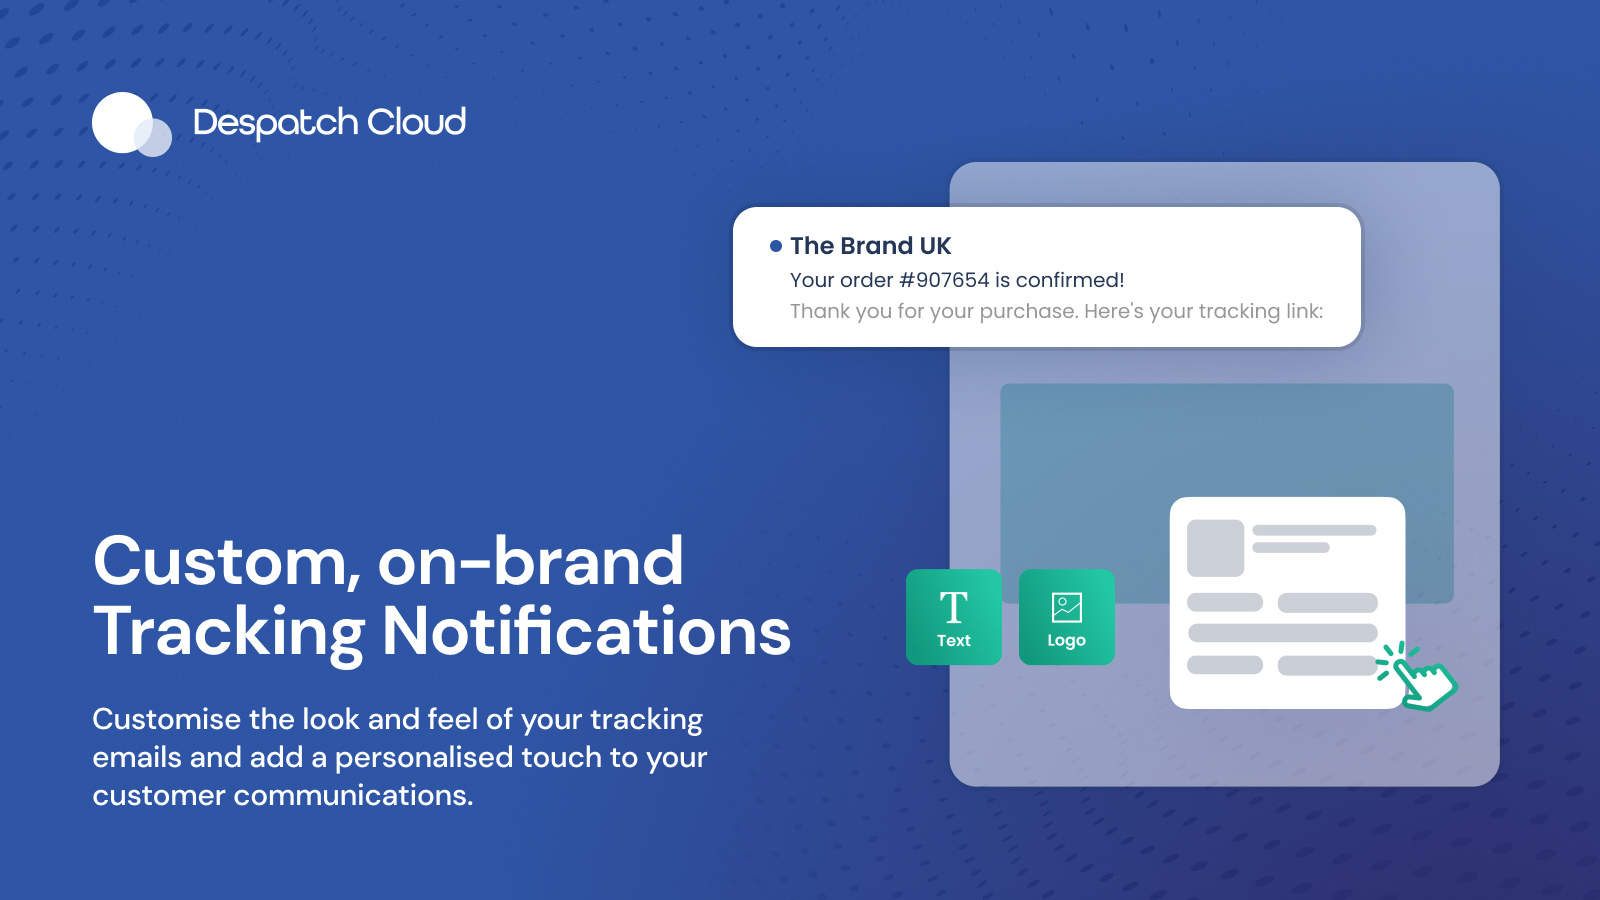 Send Milestone notifications and keep your customers informed throughout the fulfilment journey. Customise the look and feel of your tracking emails and add a personalised touch to your customer communications.